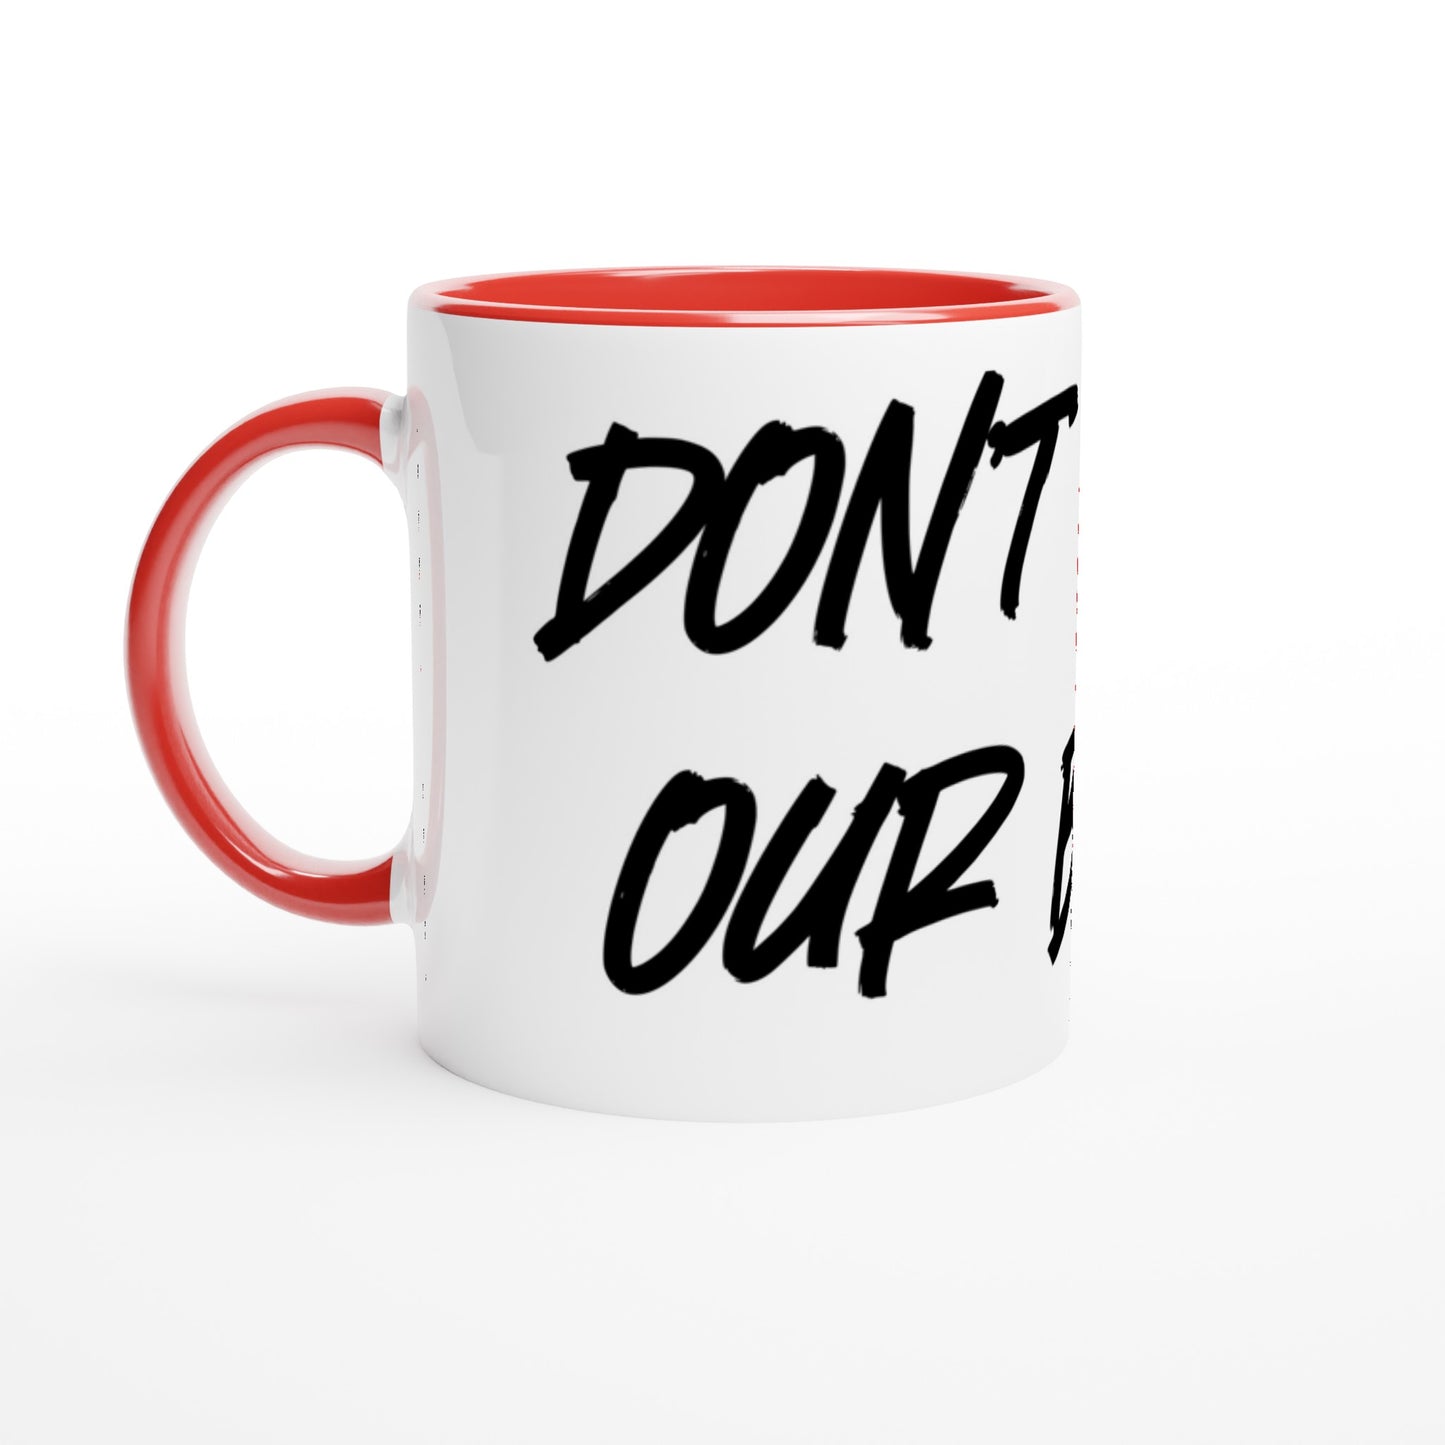 Don't Bully Our Breed Ceramic Mug with Red